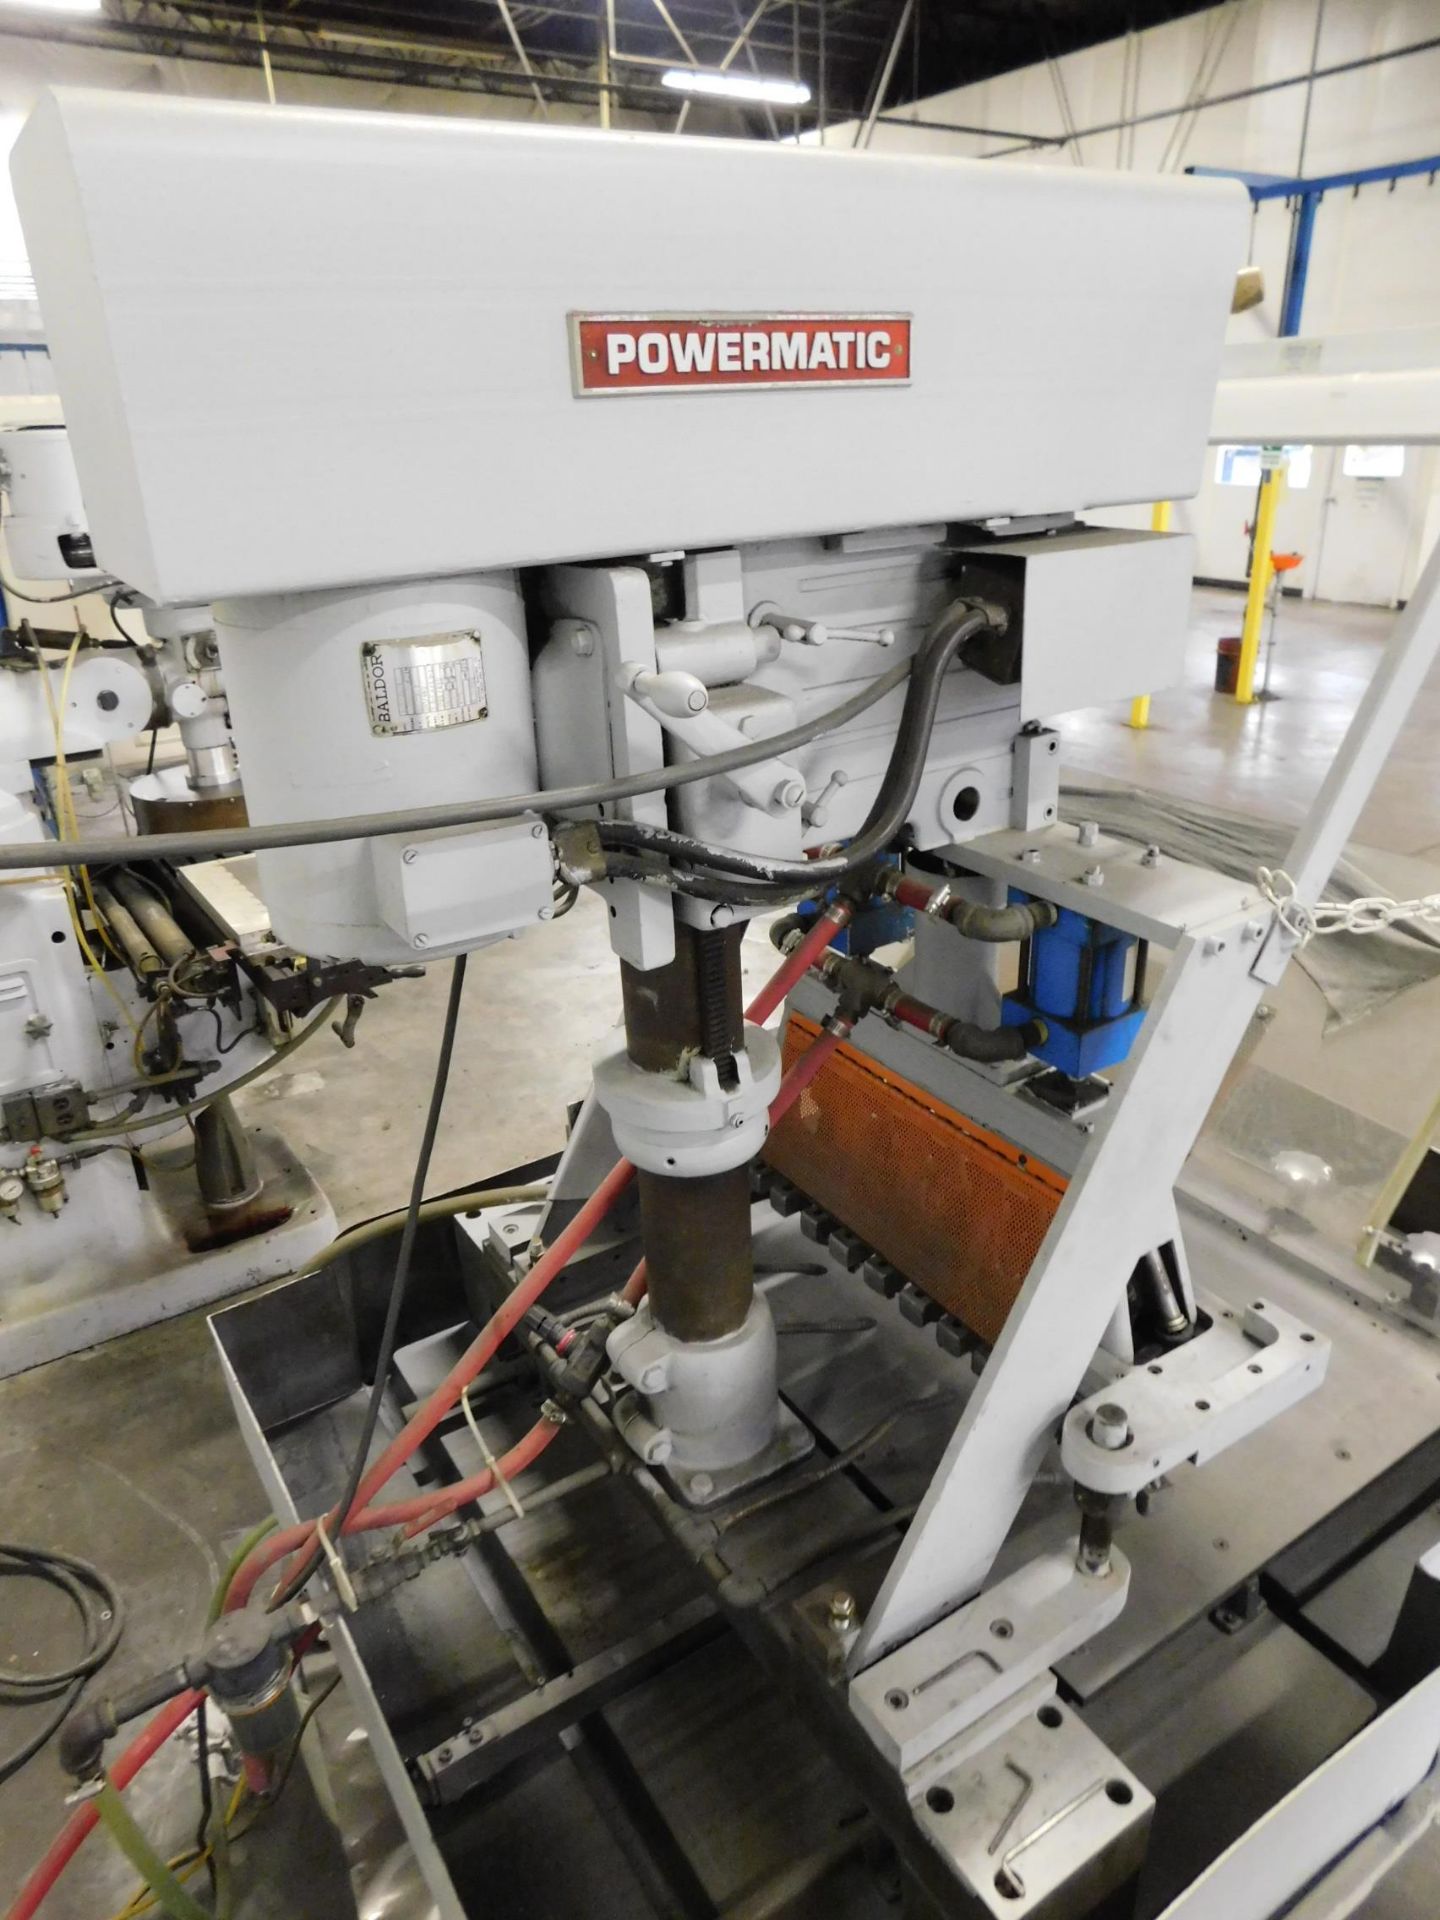 Powermatic Model 1200 Single Spindle Drill Press, 20", with Commander Drill Head - Image 6 of 6